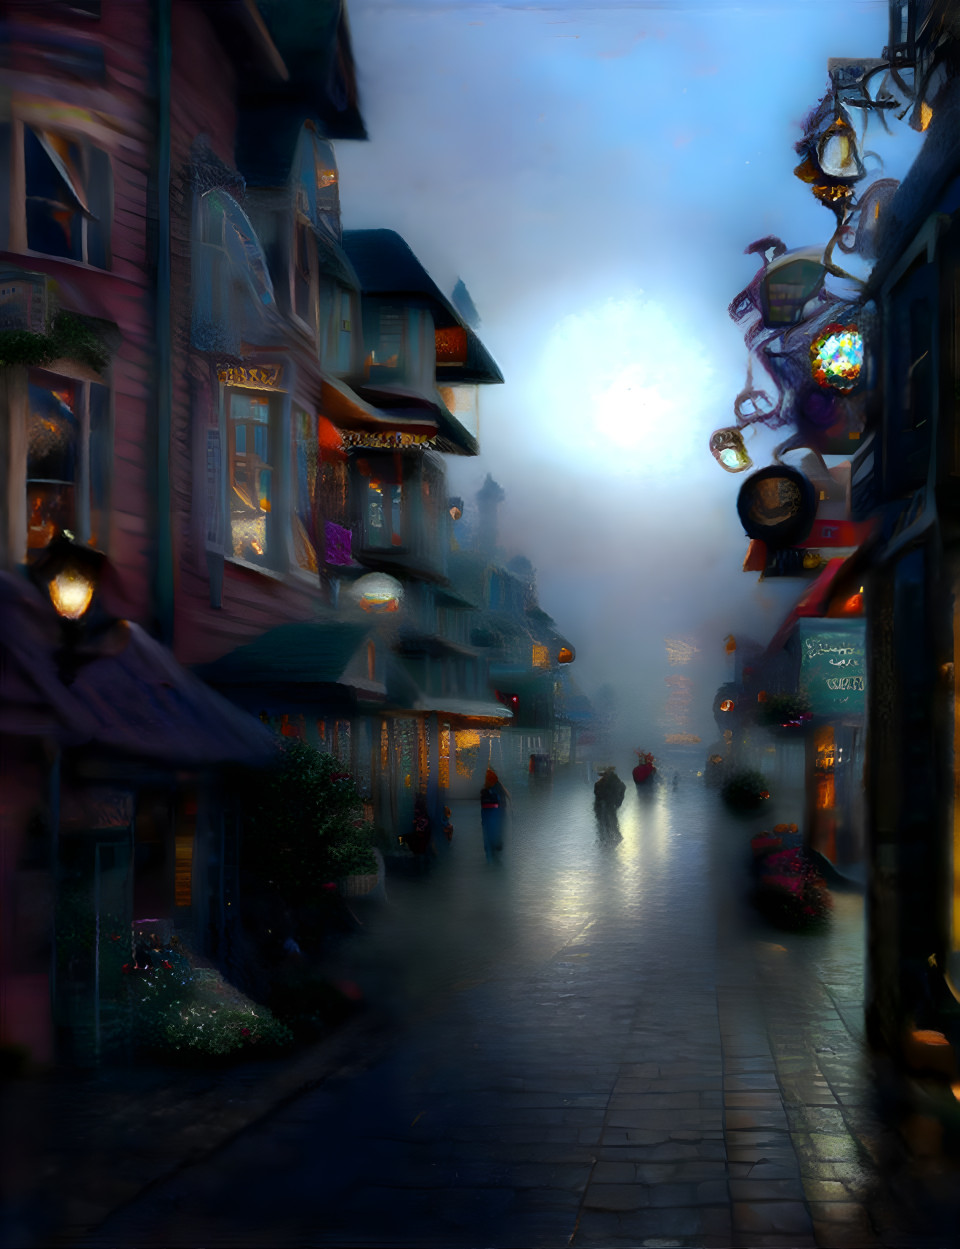 "Moody Evening City Street" - by Unreal.